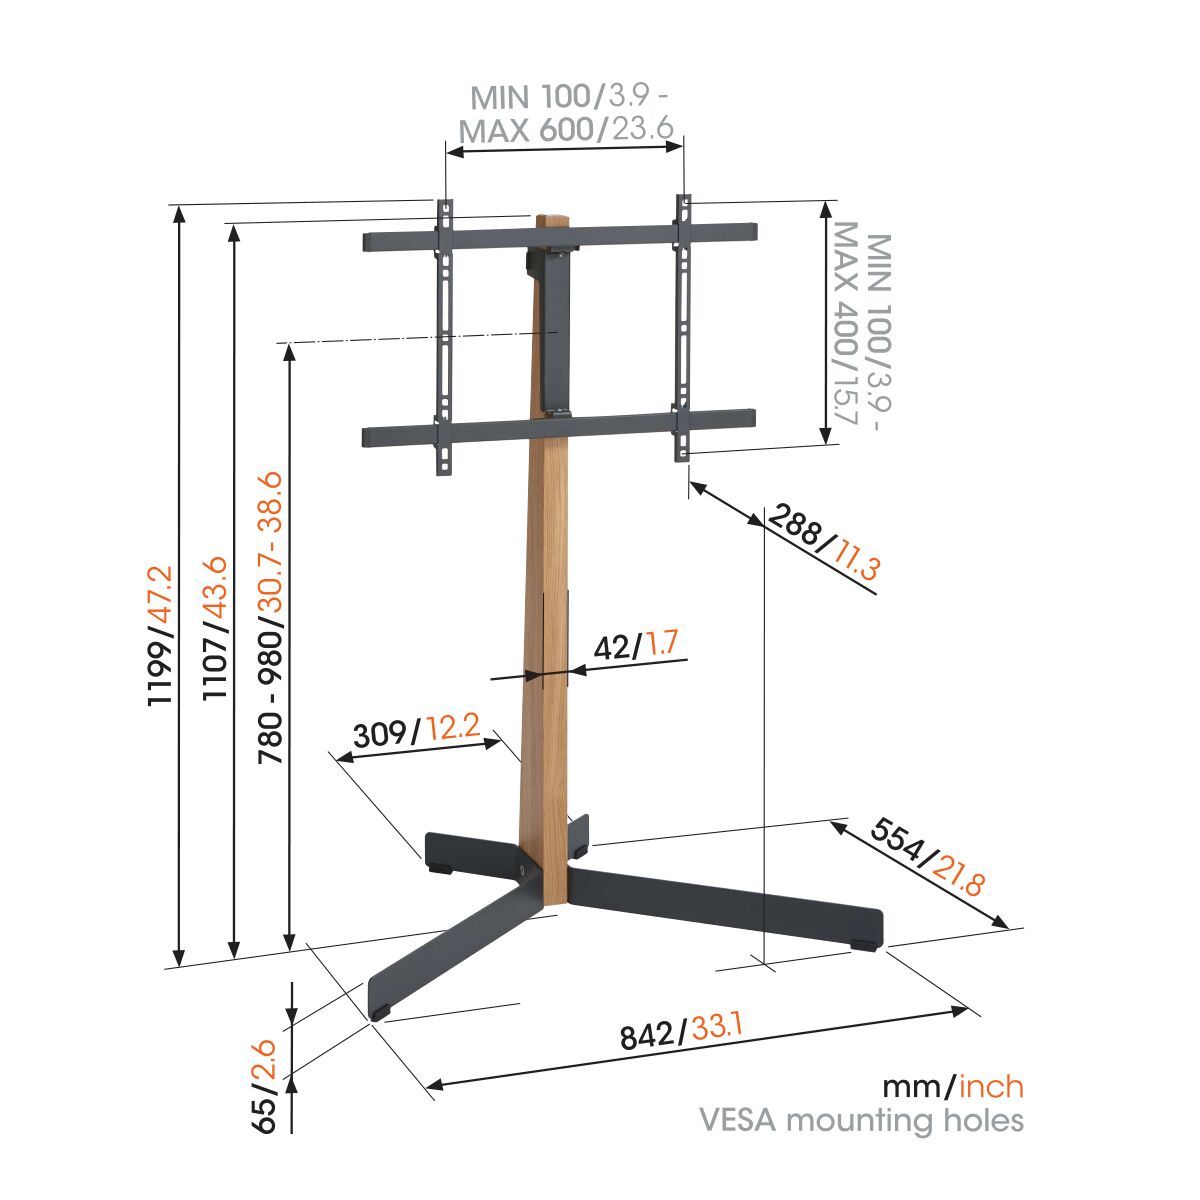 Vogel's TVS 3695 TV Floor Stand (black) - Suitable for 40 up to 77 inch TVs up to Dimensions